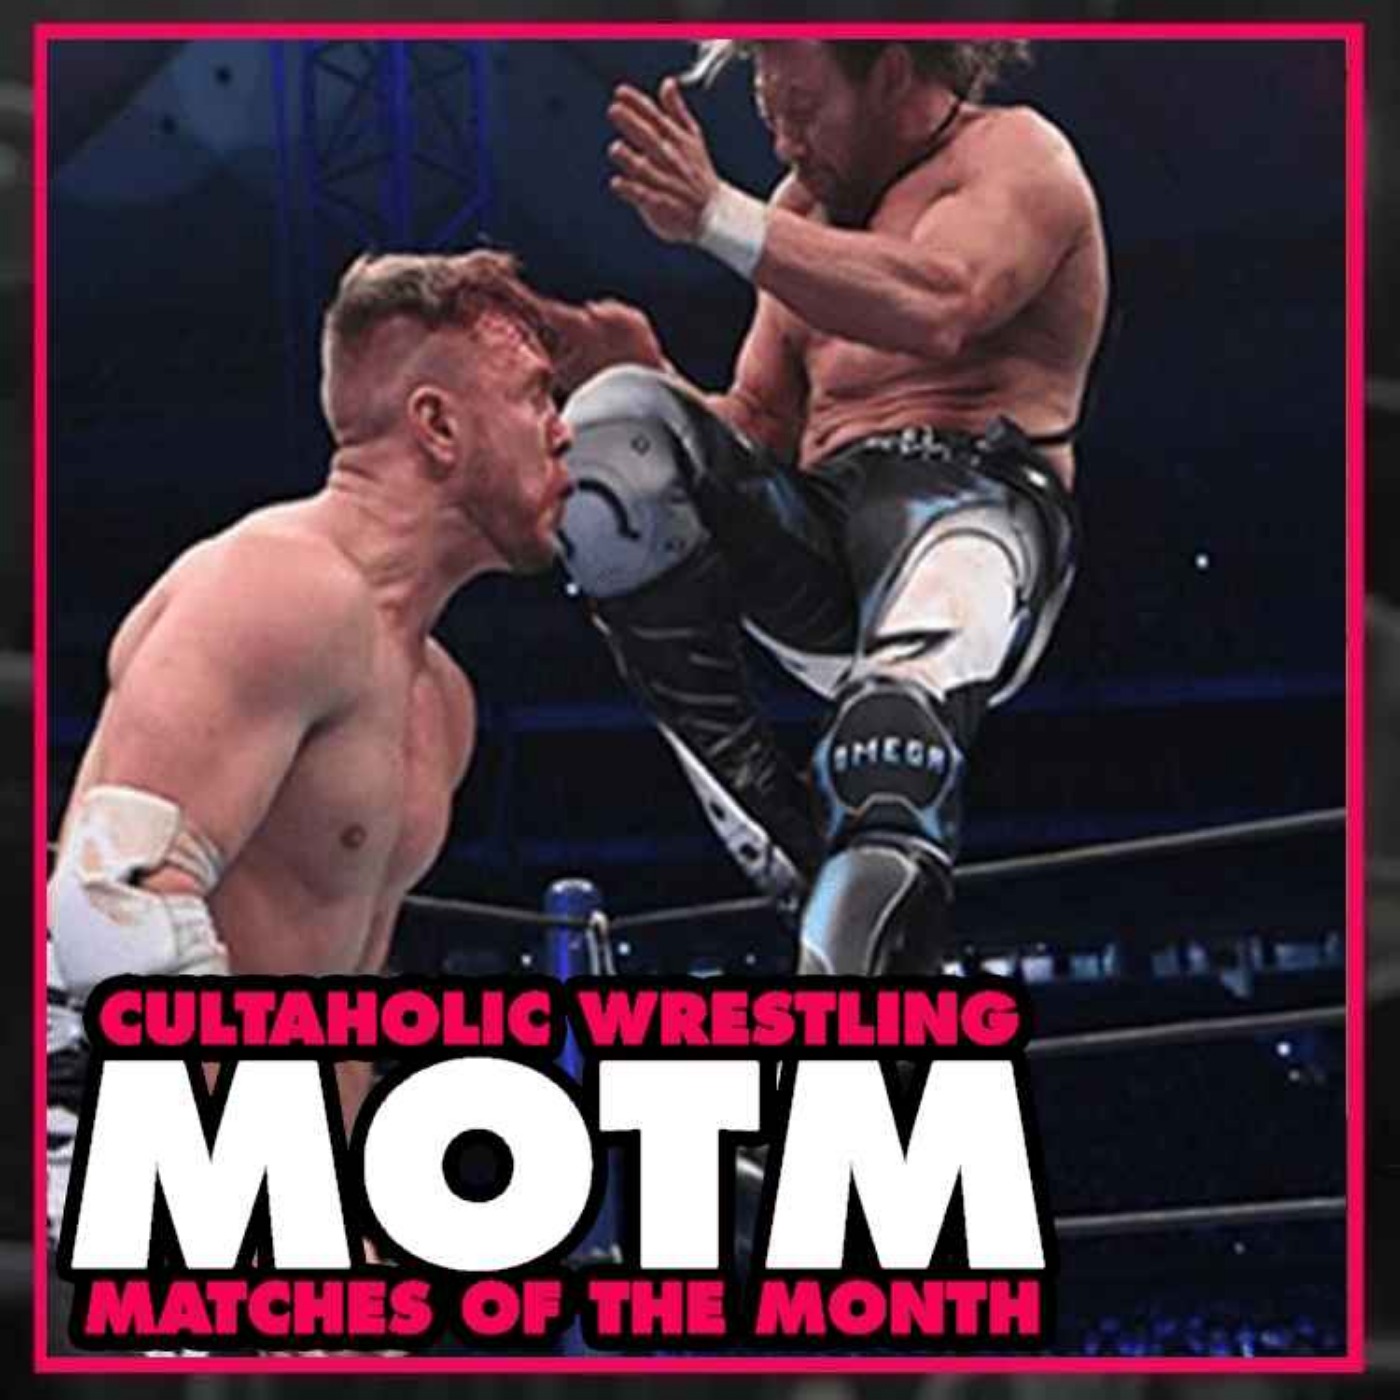 JANUARY MATCHES OF THE MONTH: Kenny Omega Vs Will Ospreay, Bryan Danielson Vs Takeshita